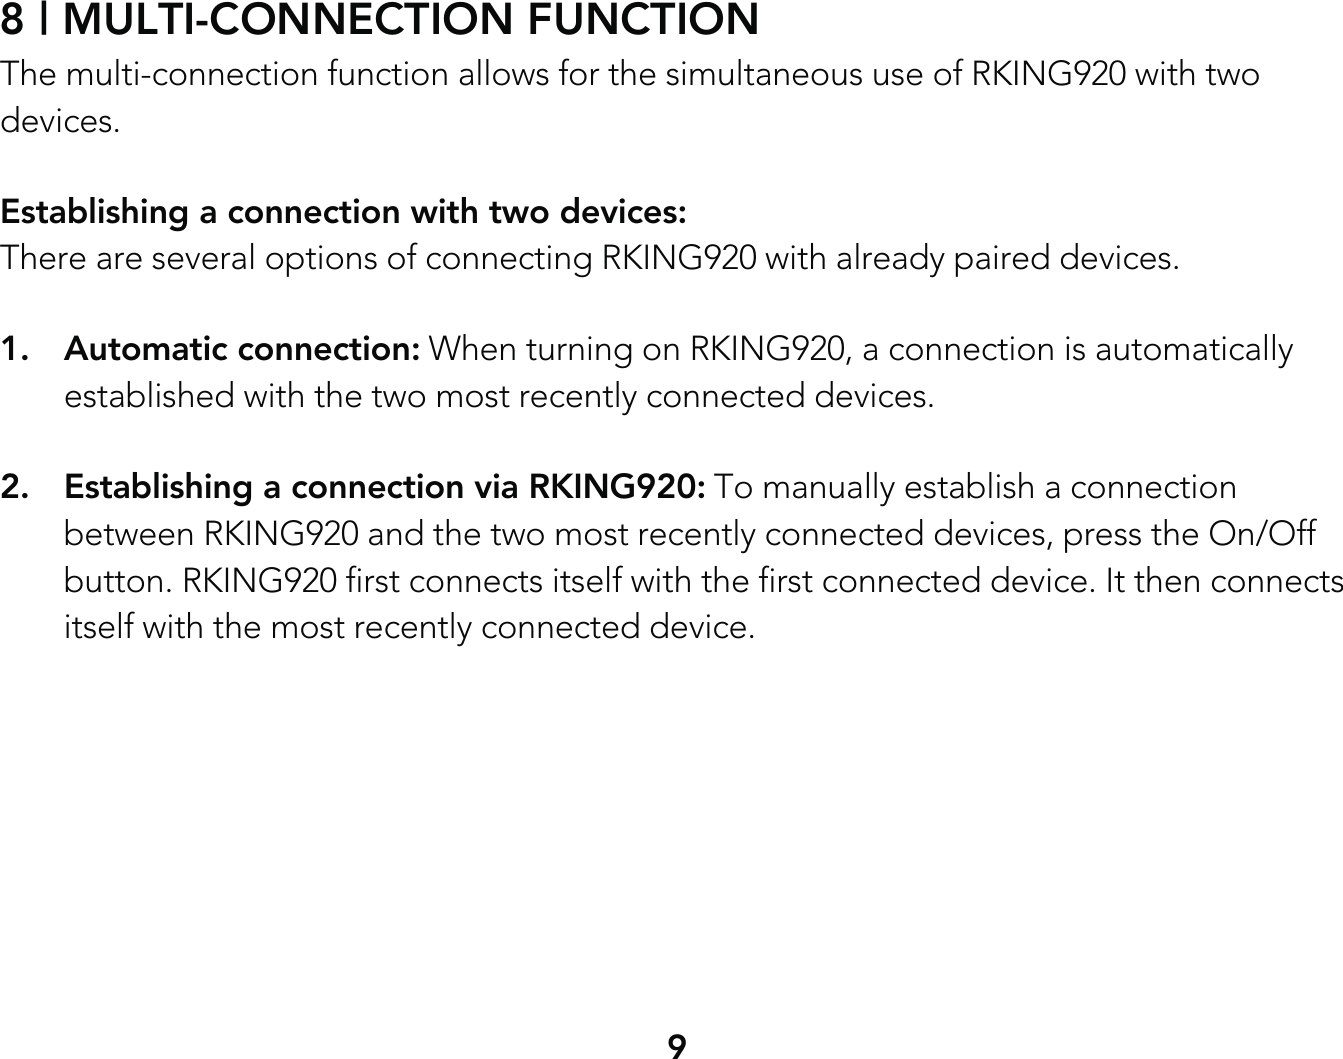 98 | MULTI-CONNECTION FUNCTIONThe multi-connection function allows for the simultaneous use of RKING920 with two devices.Establishing a connection with two devices: There are several options of connecting RKING920 with already paired devices.1. Automatic connection: When turning on RKING920, a connection is automatically   established with the two most recently connected devices.2.  Establishing a connection via RKING920: To manually establish a connection   between RKING920 and the two most recently connected devices, press the On/Off   button. RKING920 first connects itself with the first connected device. It then connects   itself with the most recently connected device.